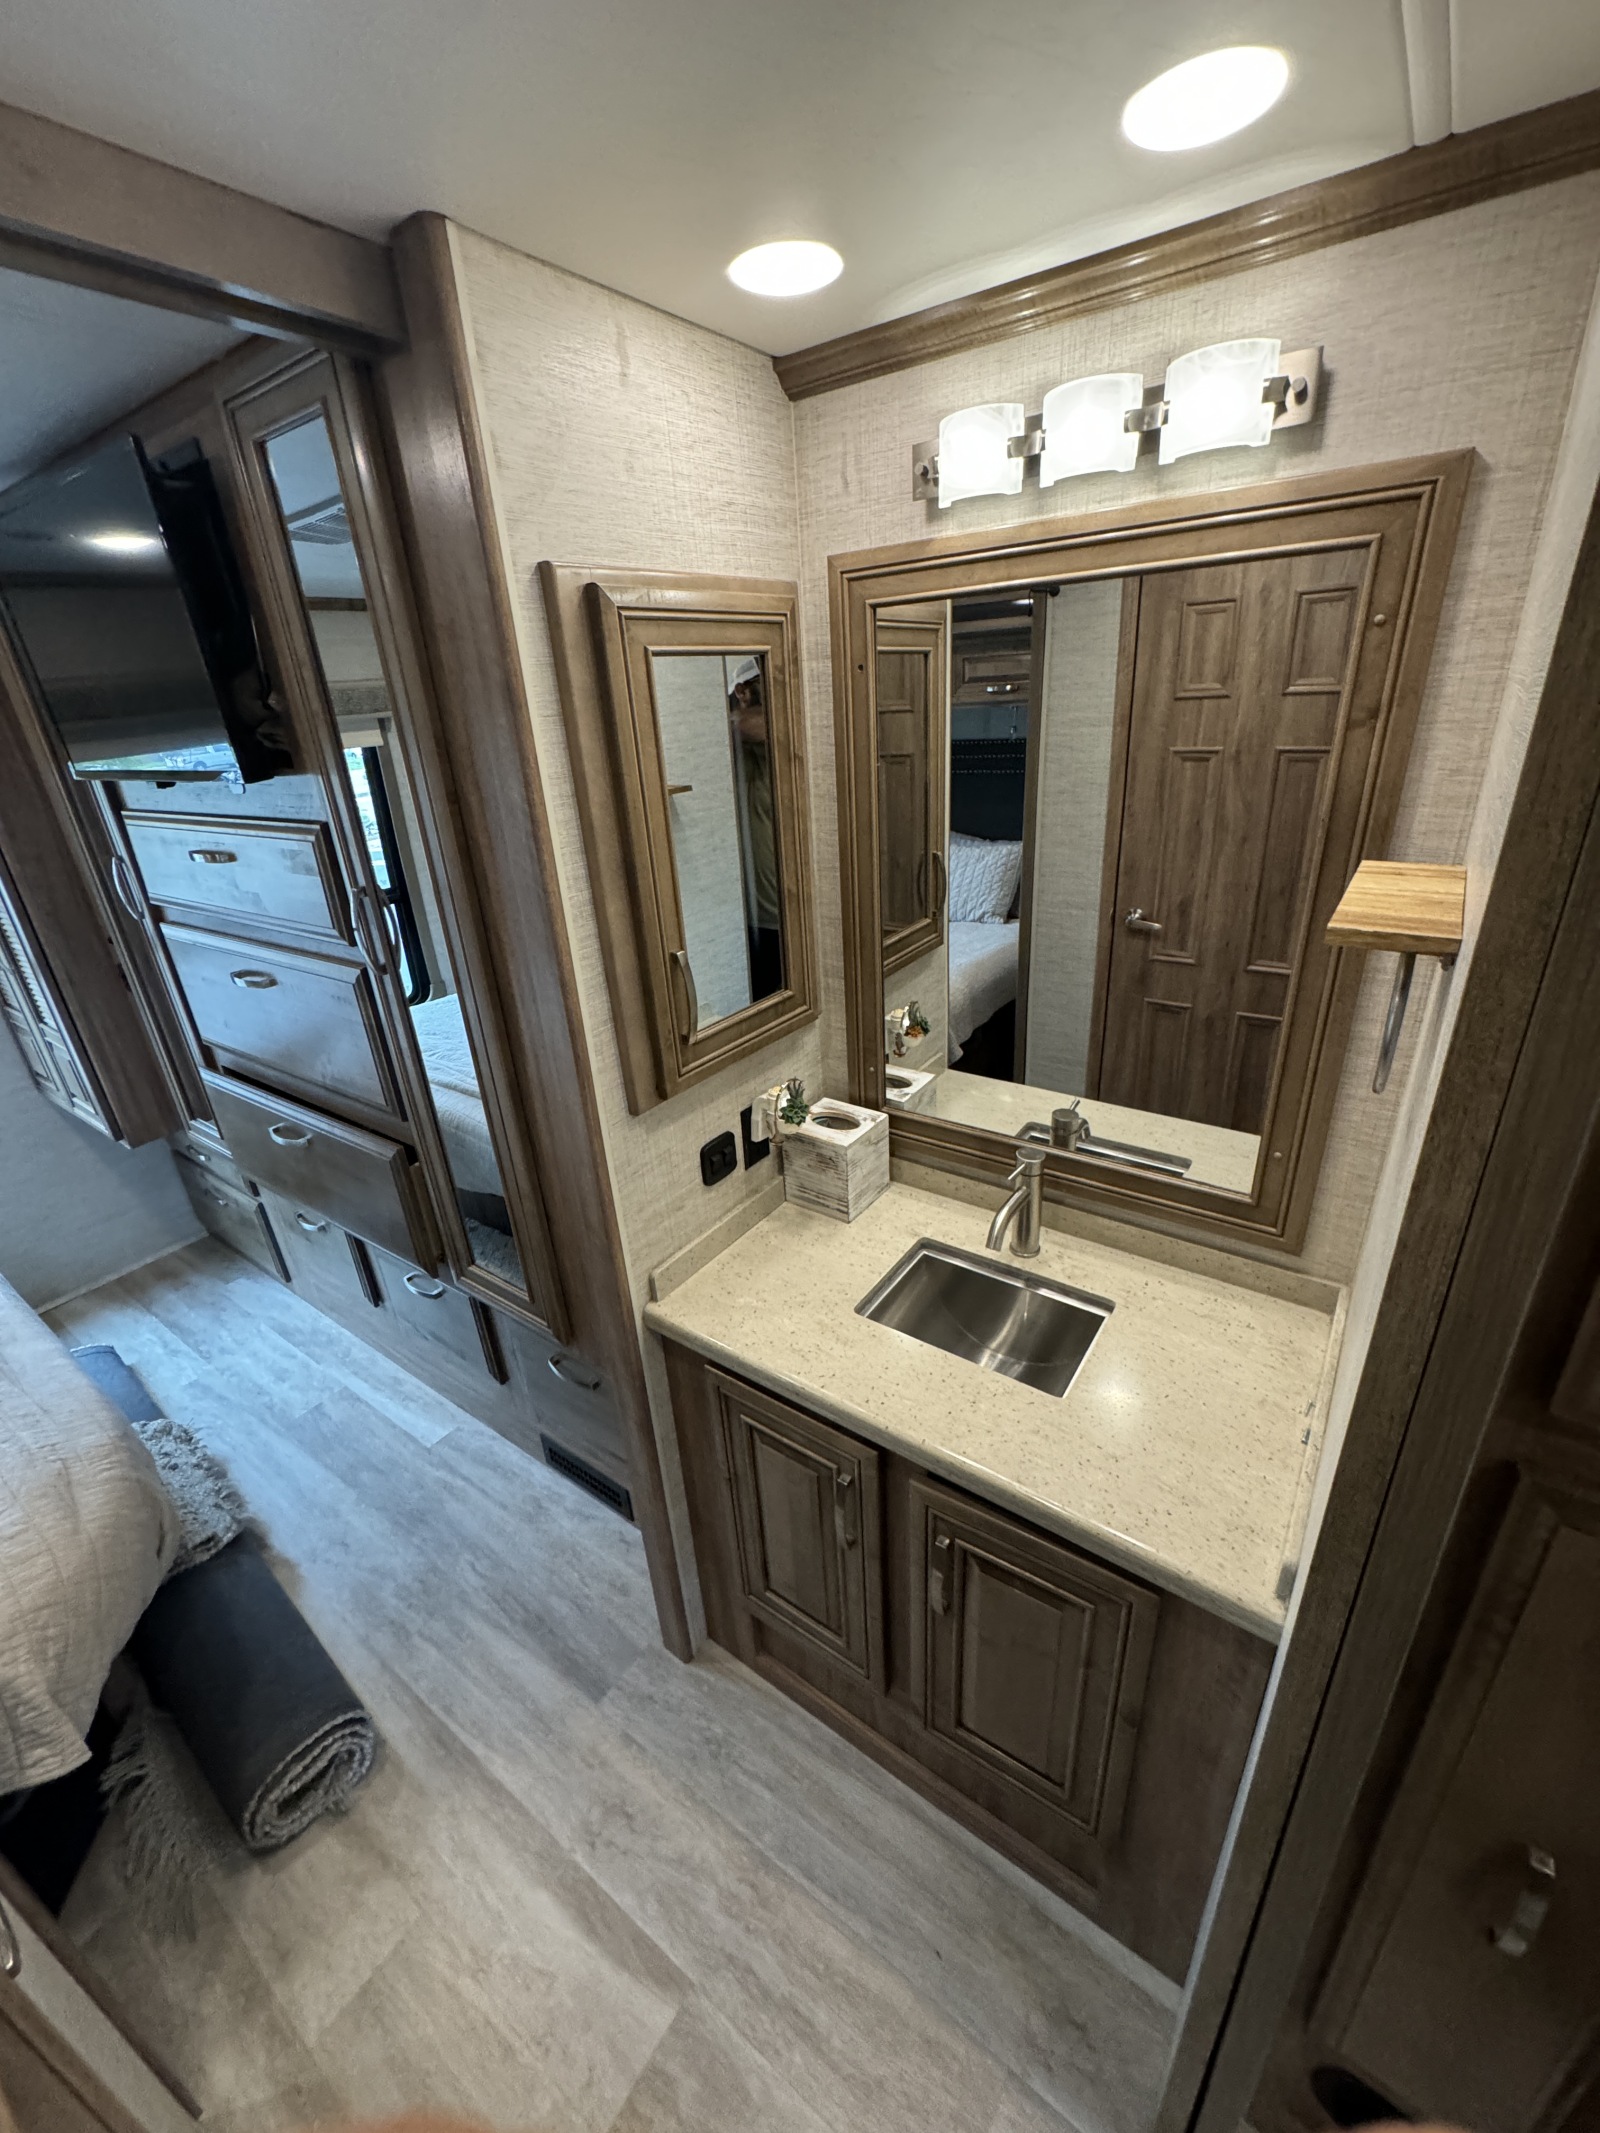 For Sale: 2021 Jayco Seneca 37TS Super Class C - Super Clean and Ready to Go... - photo5